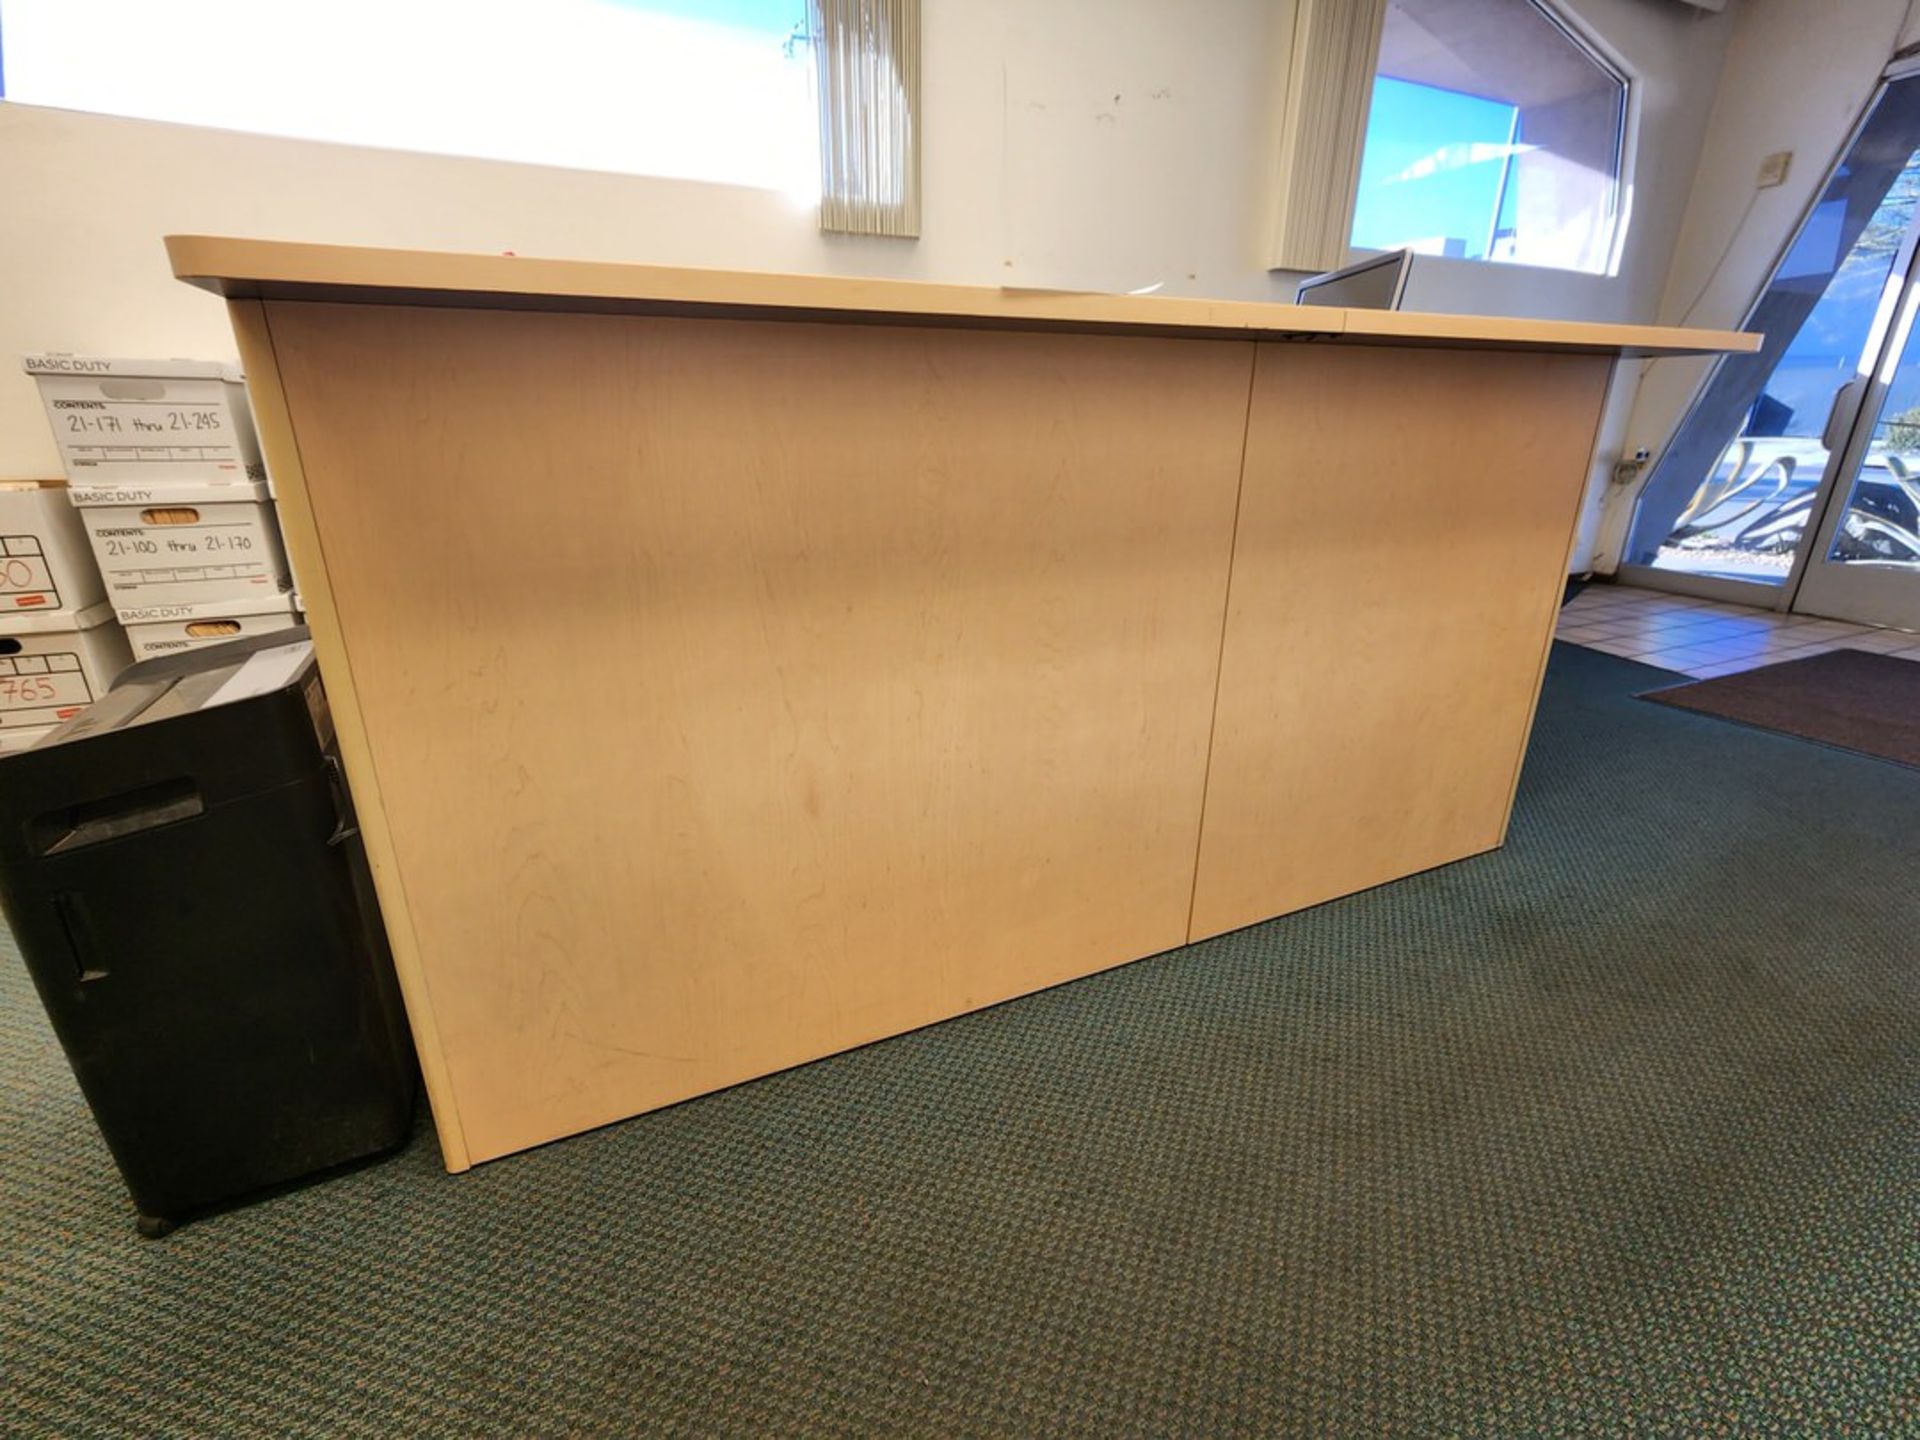 Office Contents (6) Chairs, 4-Door Cabinet, L-Shape Desk (No Electronics) - Image 6 of 12